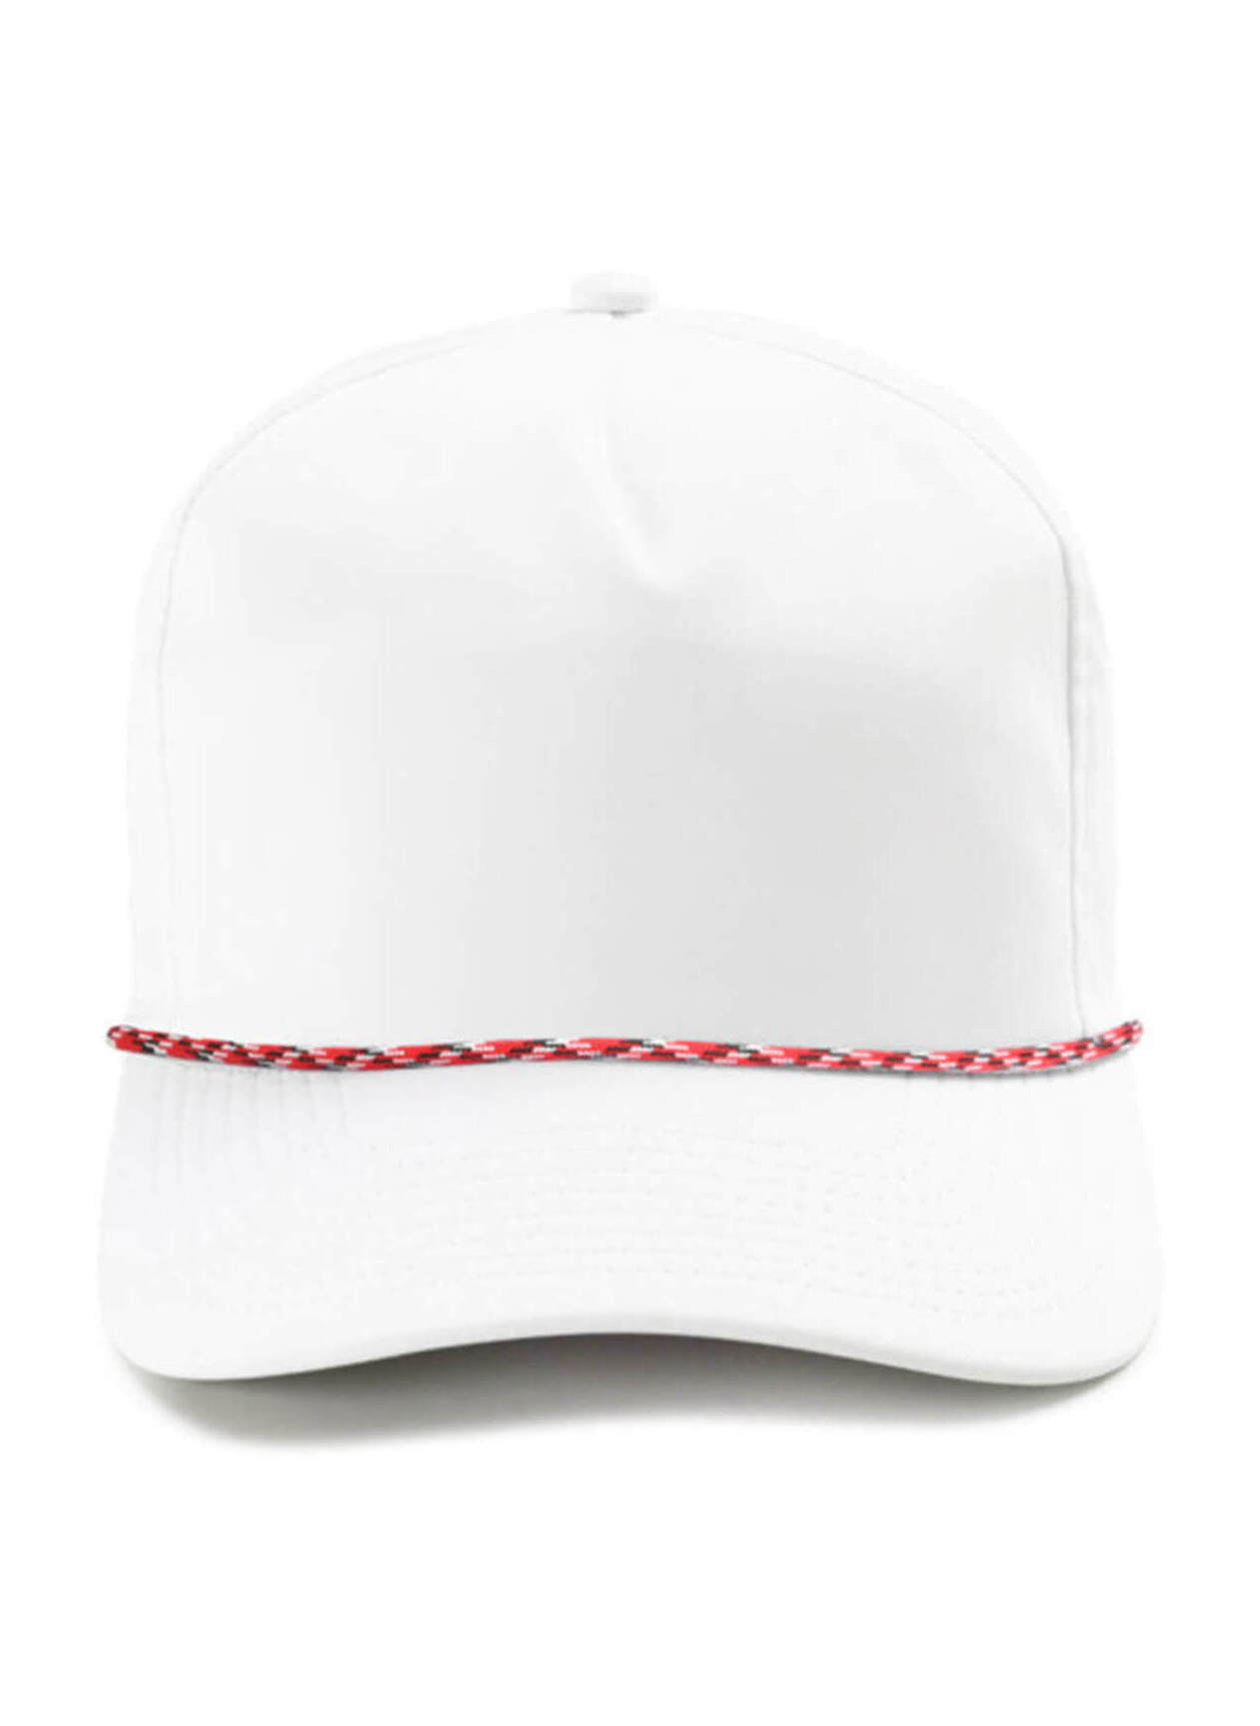 Imperial White / Red Amd Black The Wrightson Performance Rope Hat